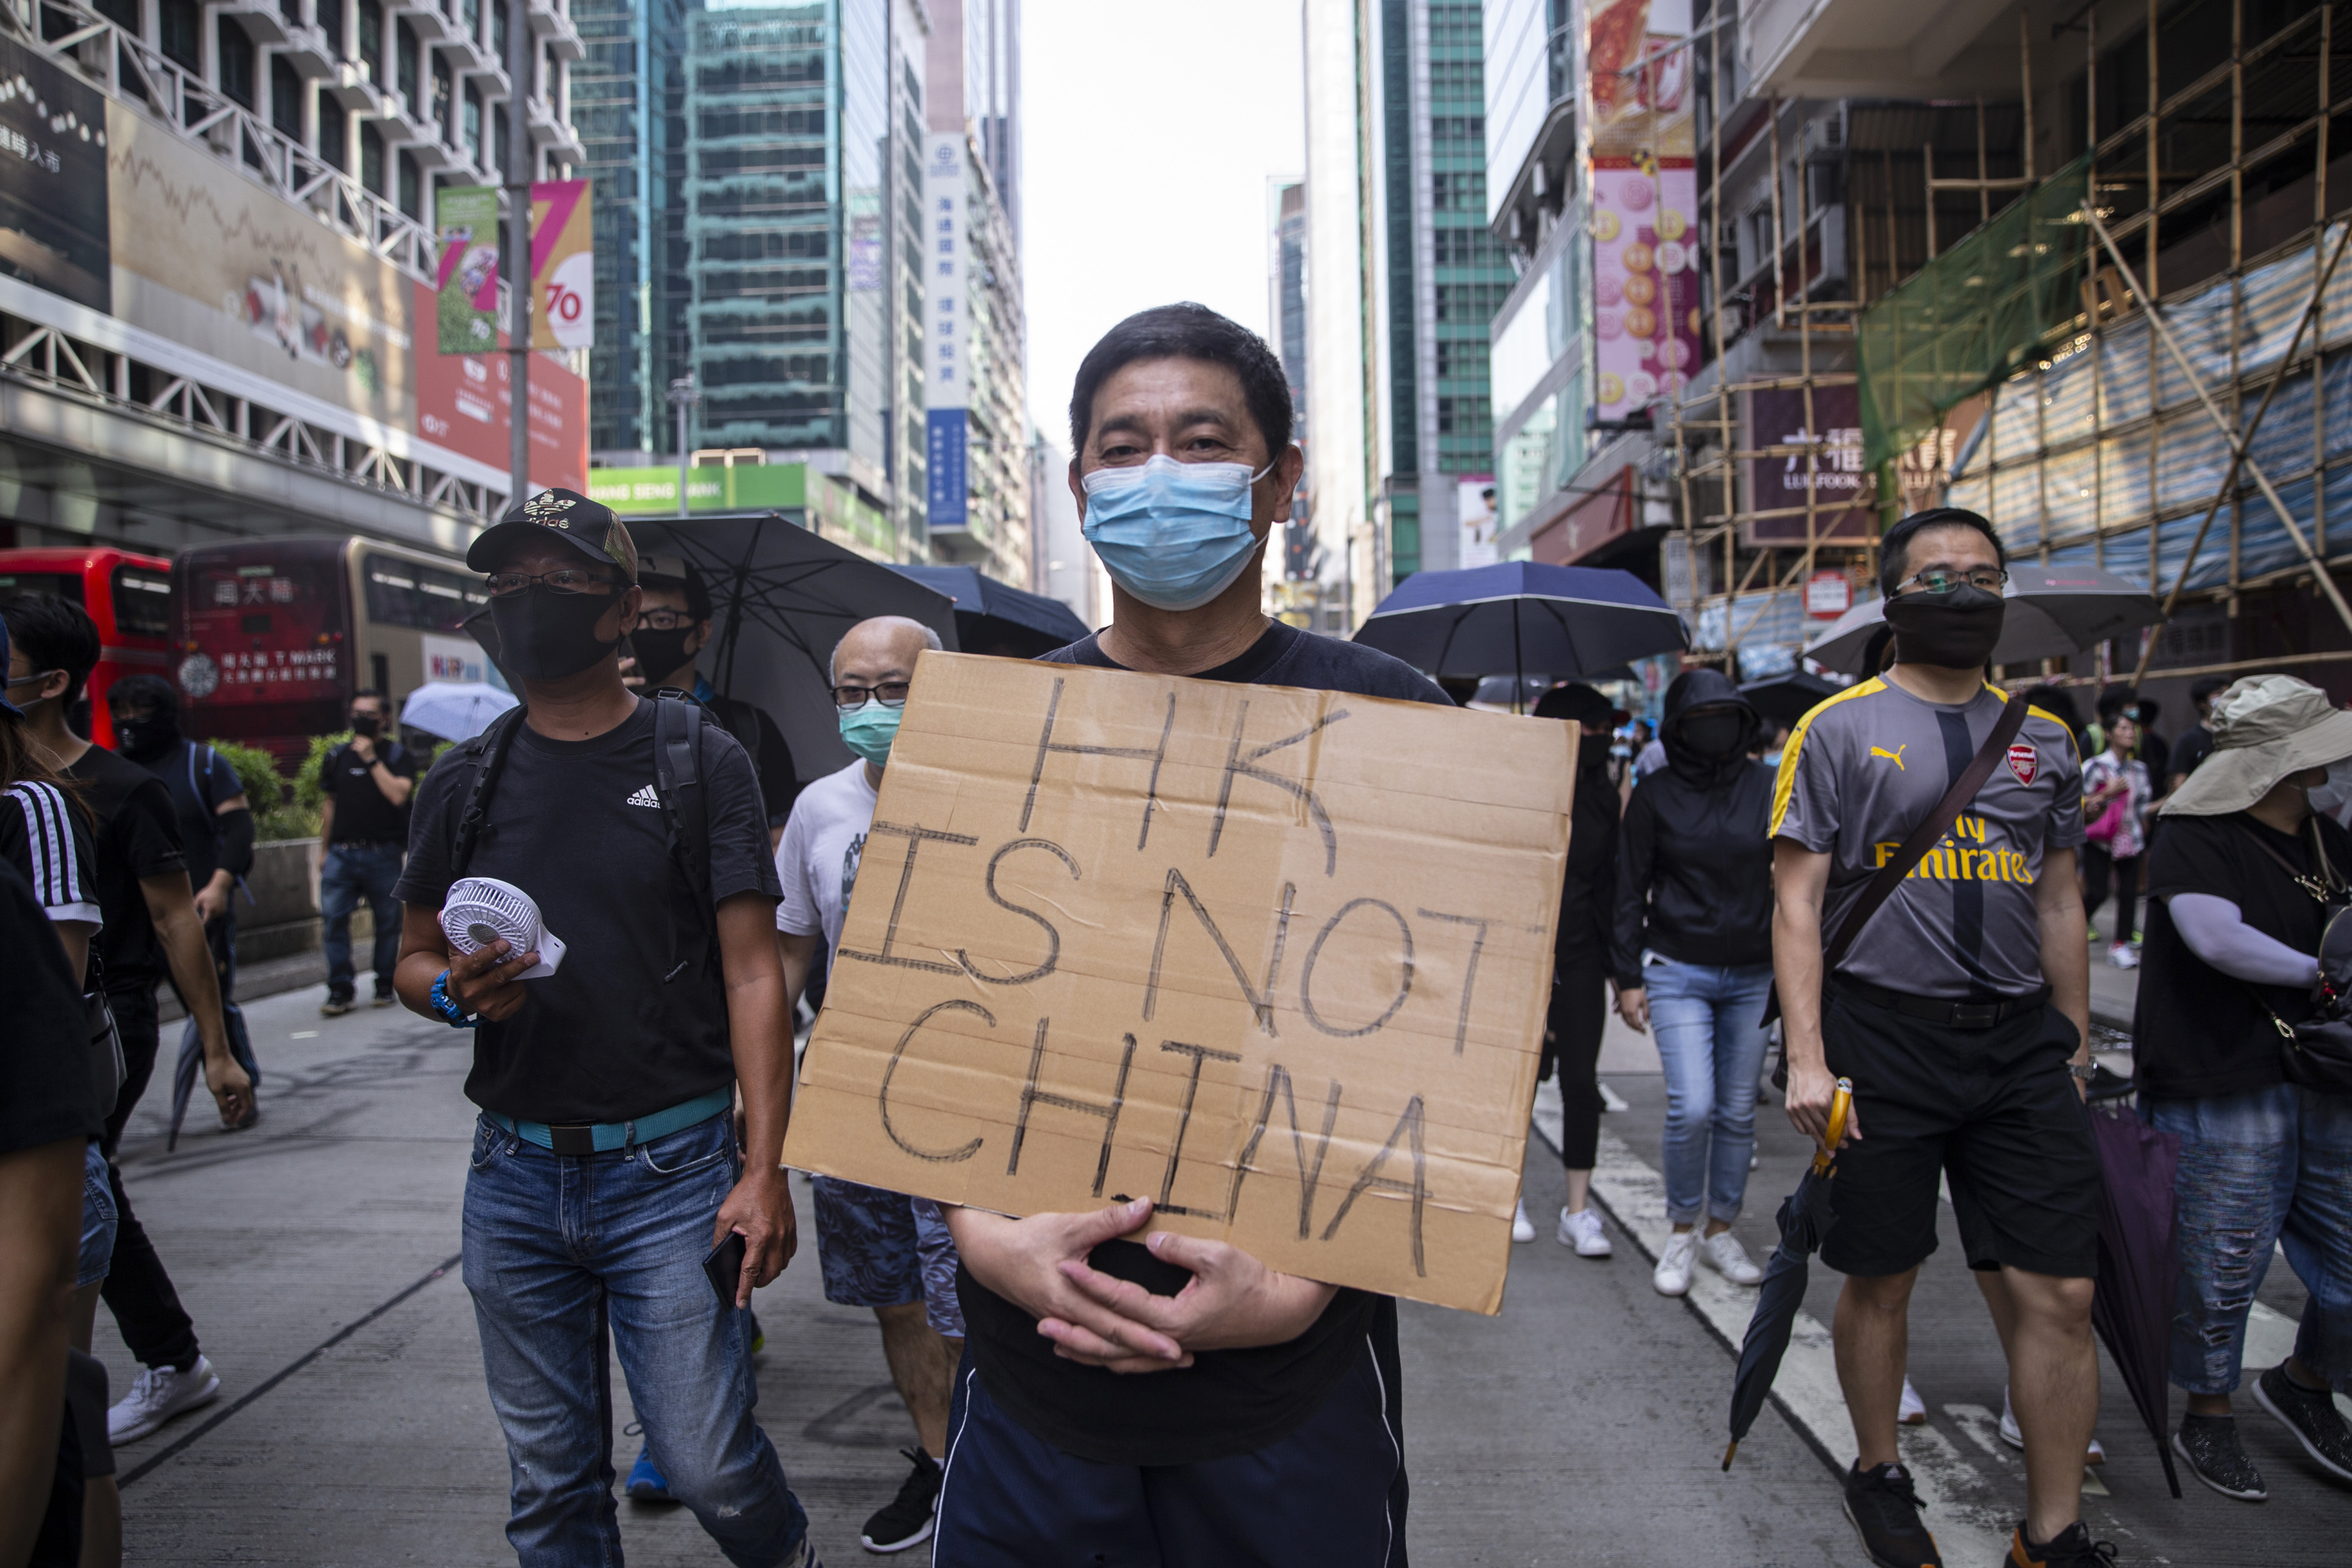 A pro-democracy demonstrator holds a sign reading "HK Is Not China" during a protest in the Mong Kok district of Hong Kong, China, on Tuesday, Oct. 1, 2019. (Chan Long Hei/Bloomberg via Getty Images)